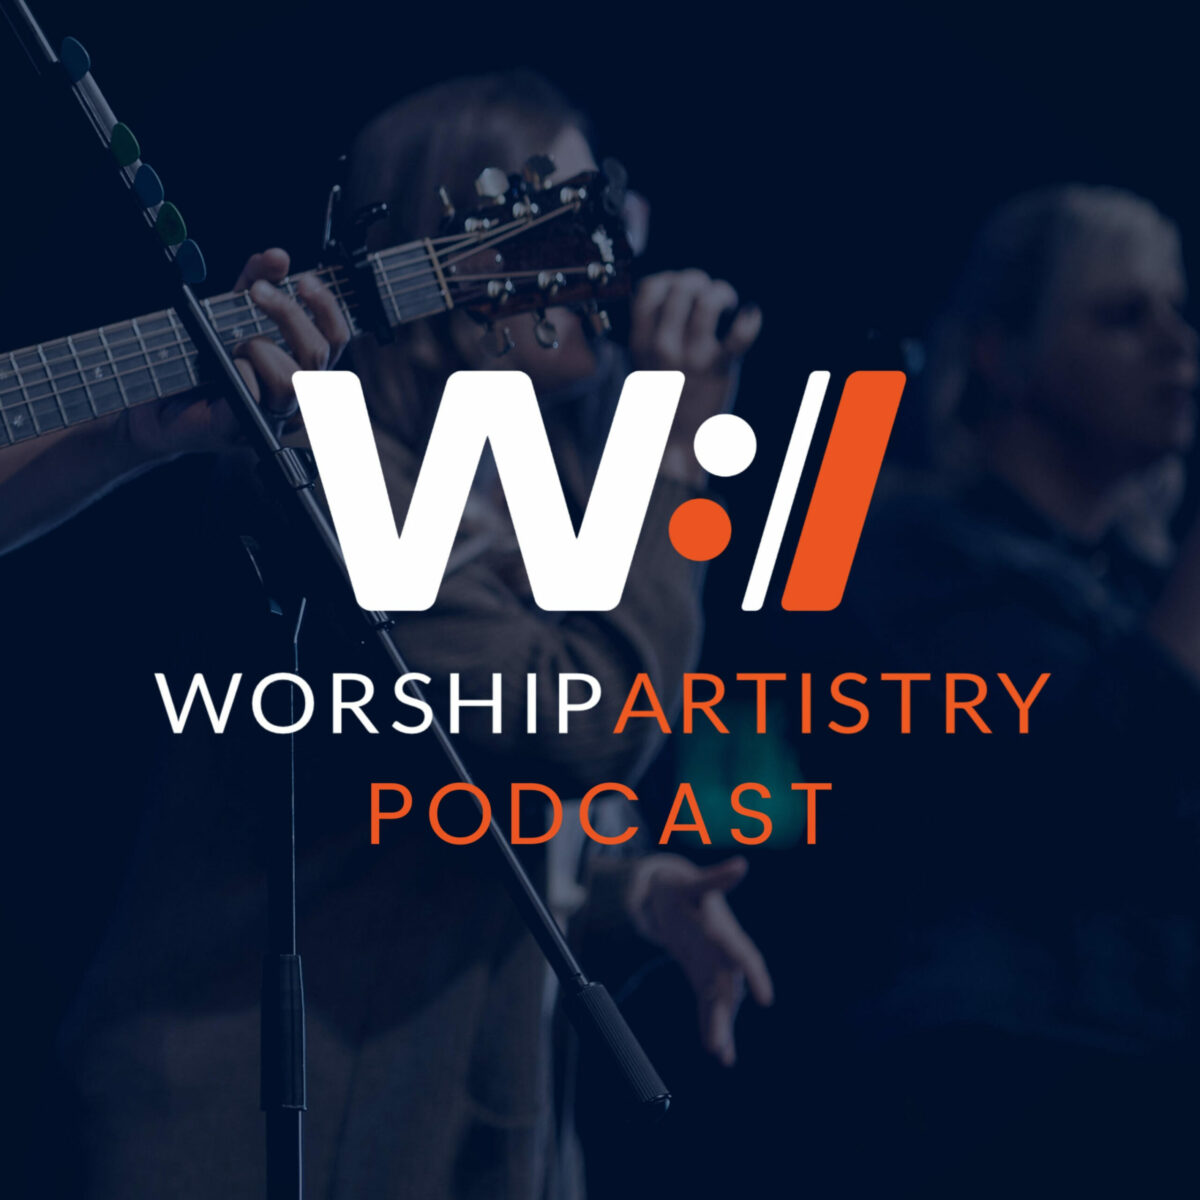 Worship Artistry Podcast A Creative Process for All (Not Just Creatives!) with Rich Kirkpatrick